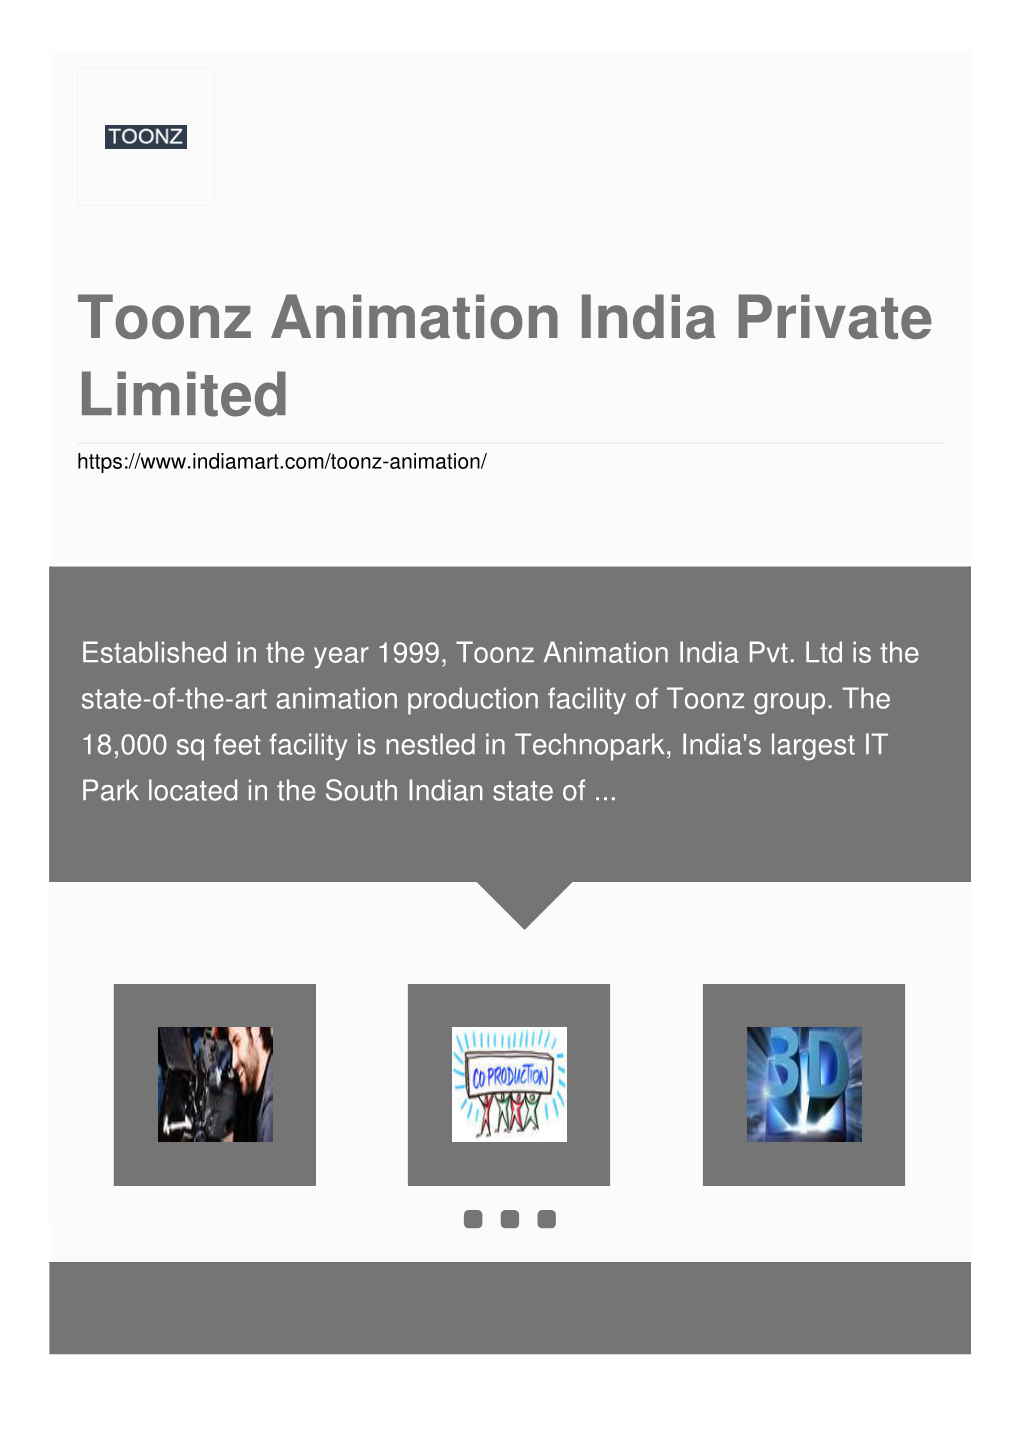 Toonz Animation India Private Limited